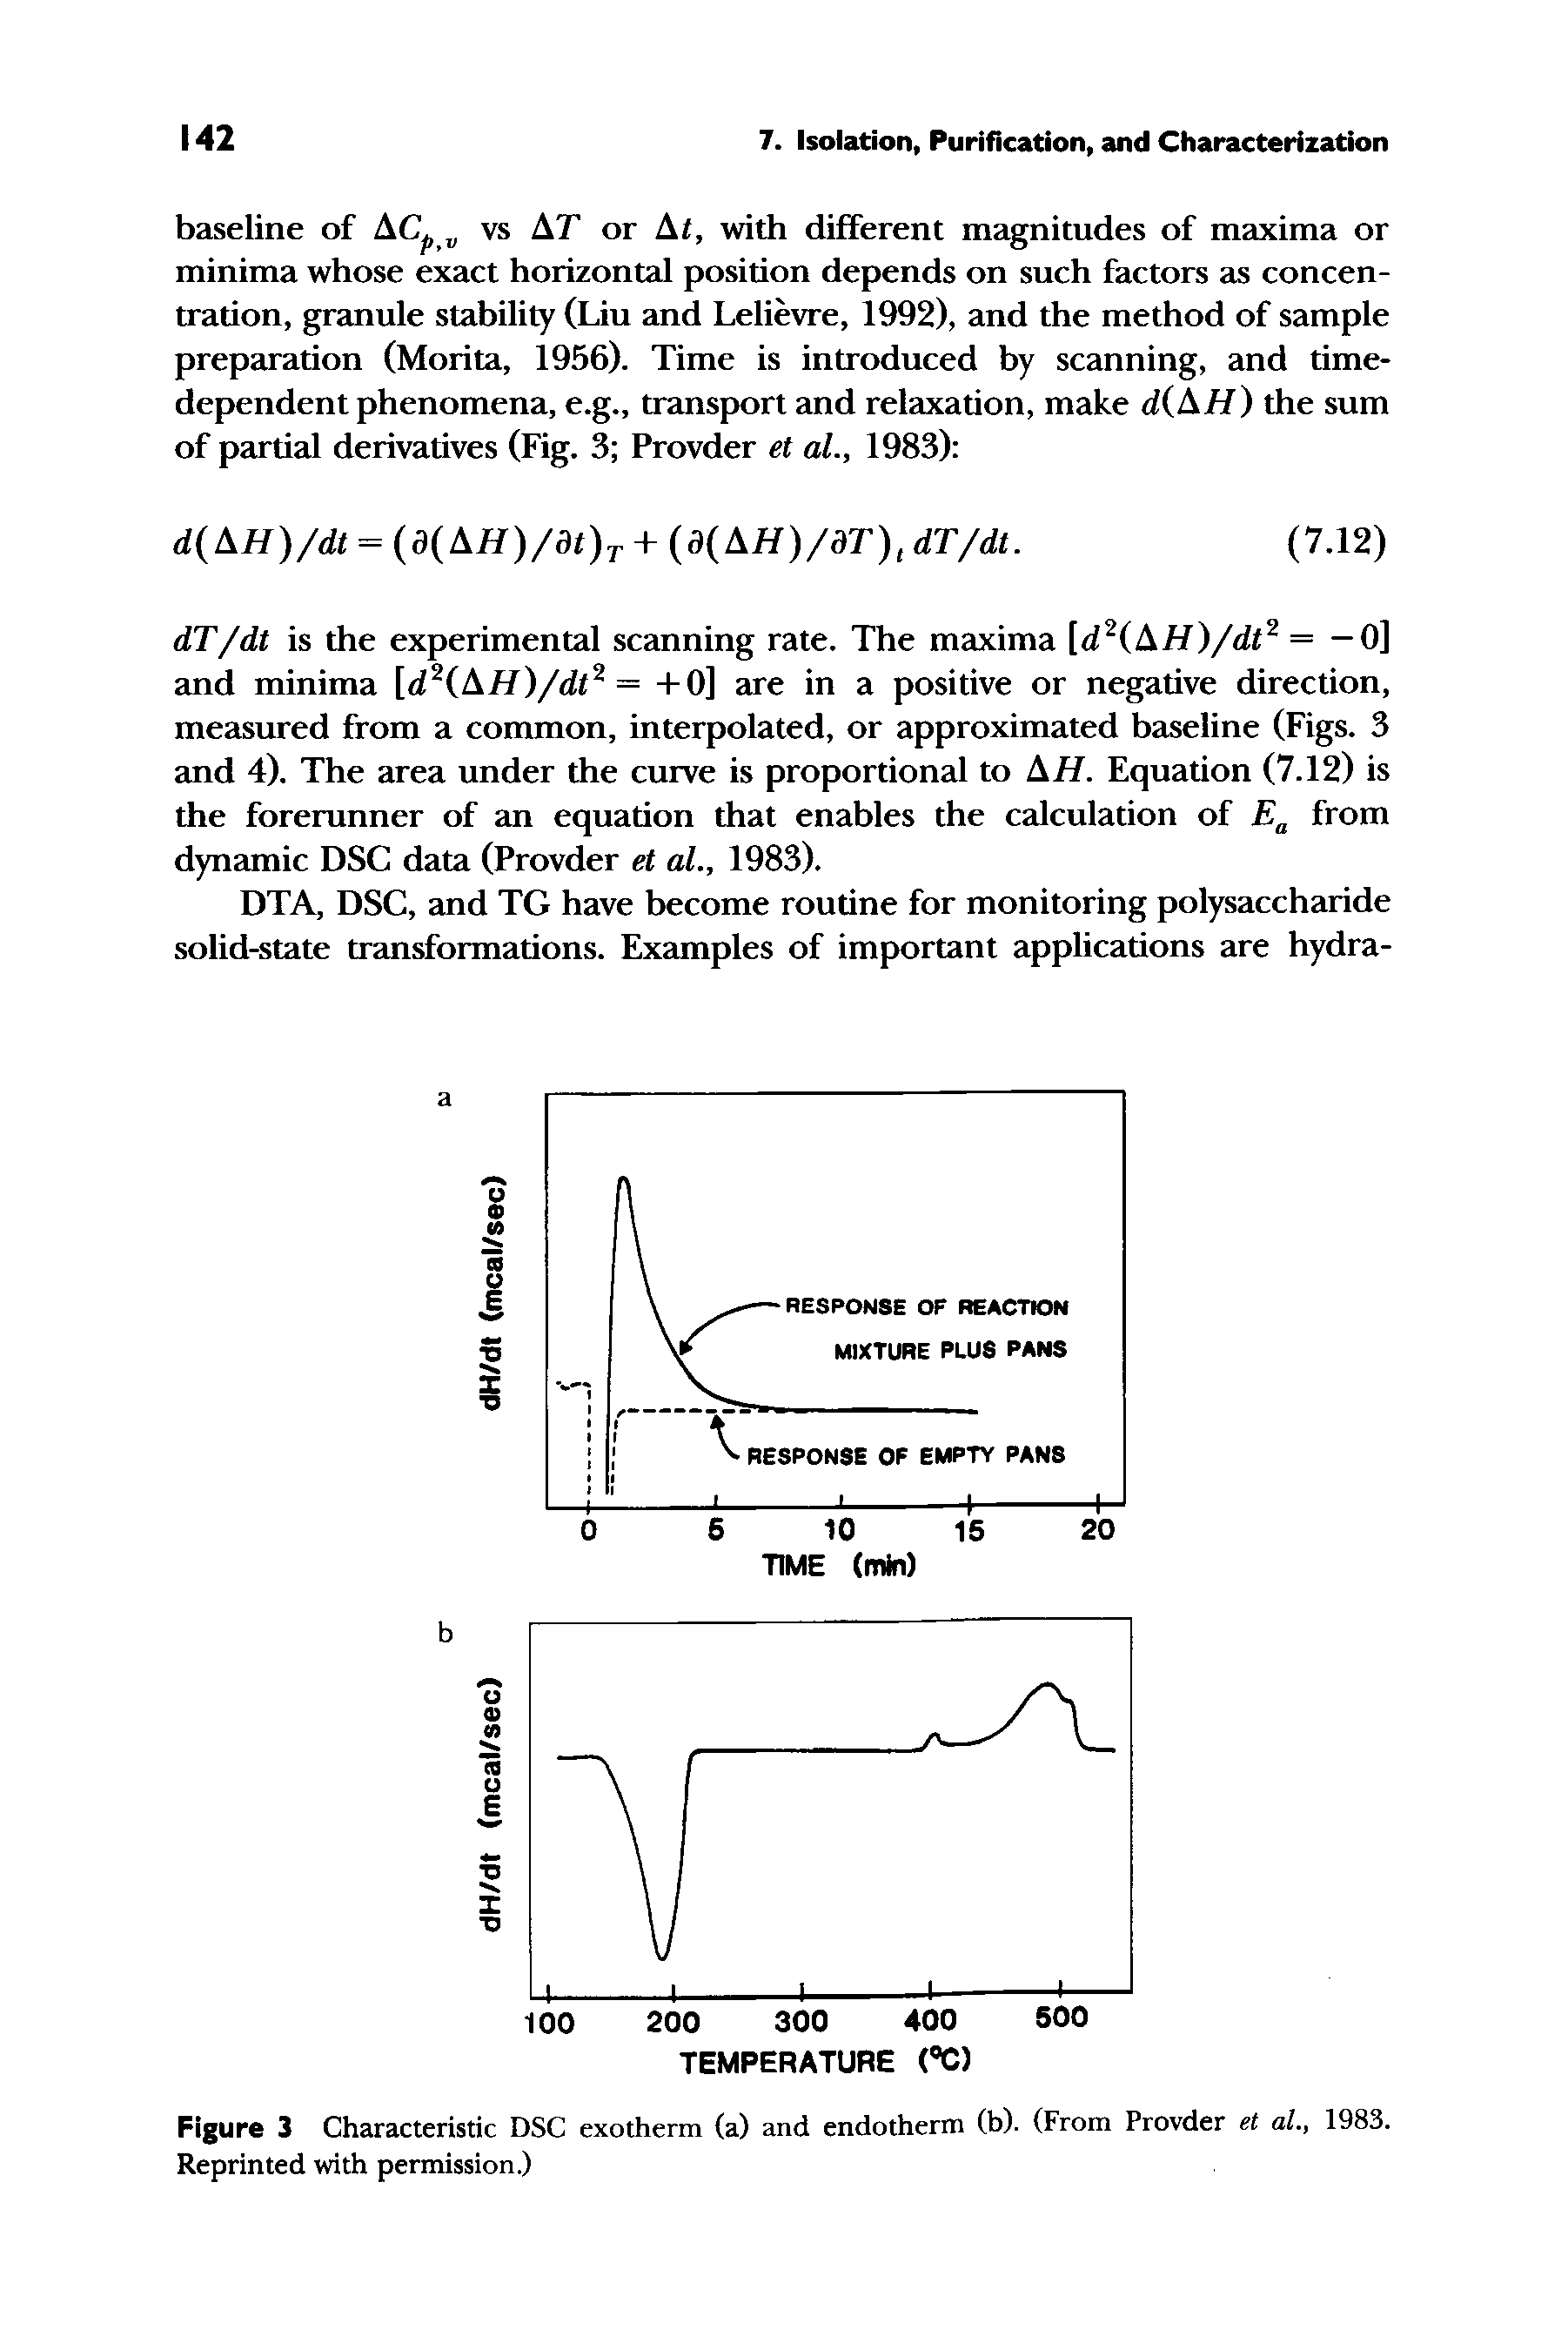 Figure 3 Characteristic DSC exotherm (a) and endotherm (b). (From Provder et al., 1983. Reprinted with permission.)...